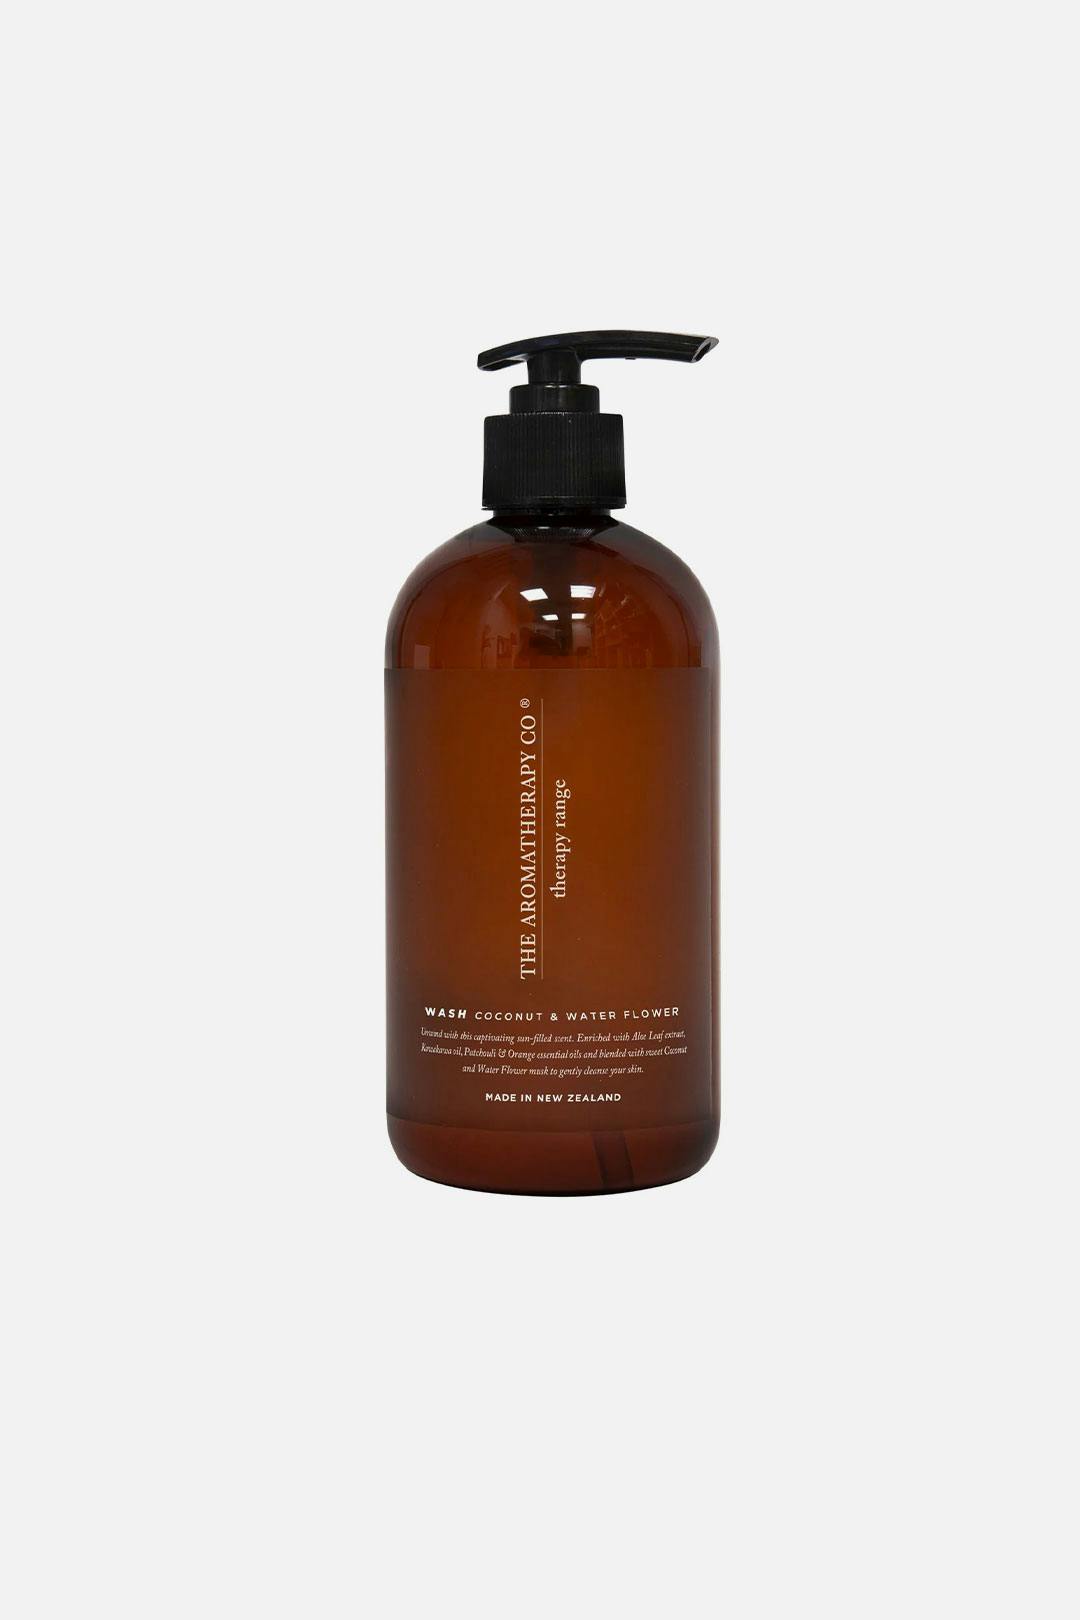 Therapy hand & body wash